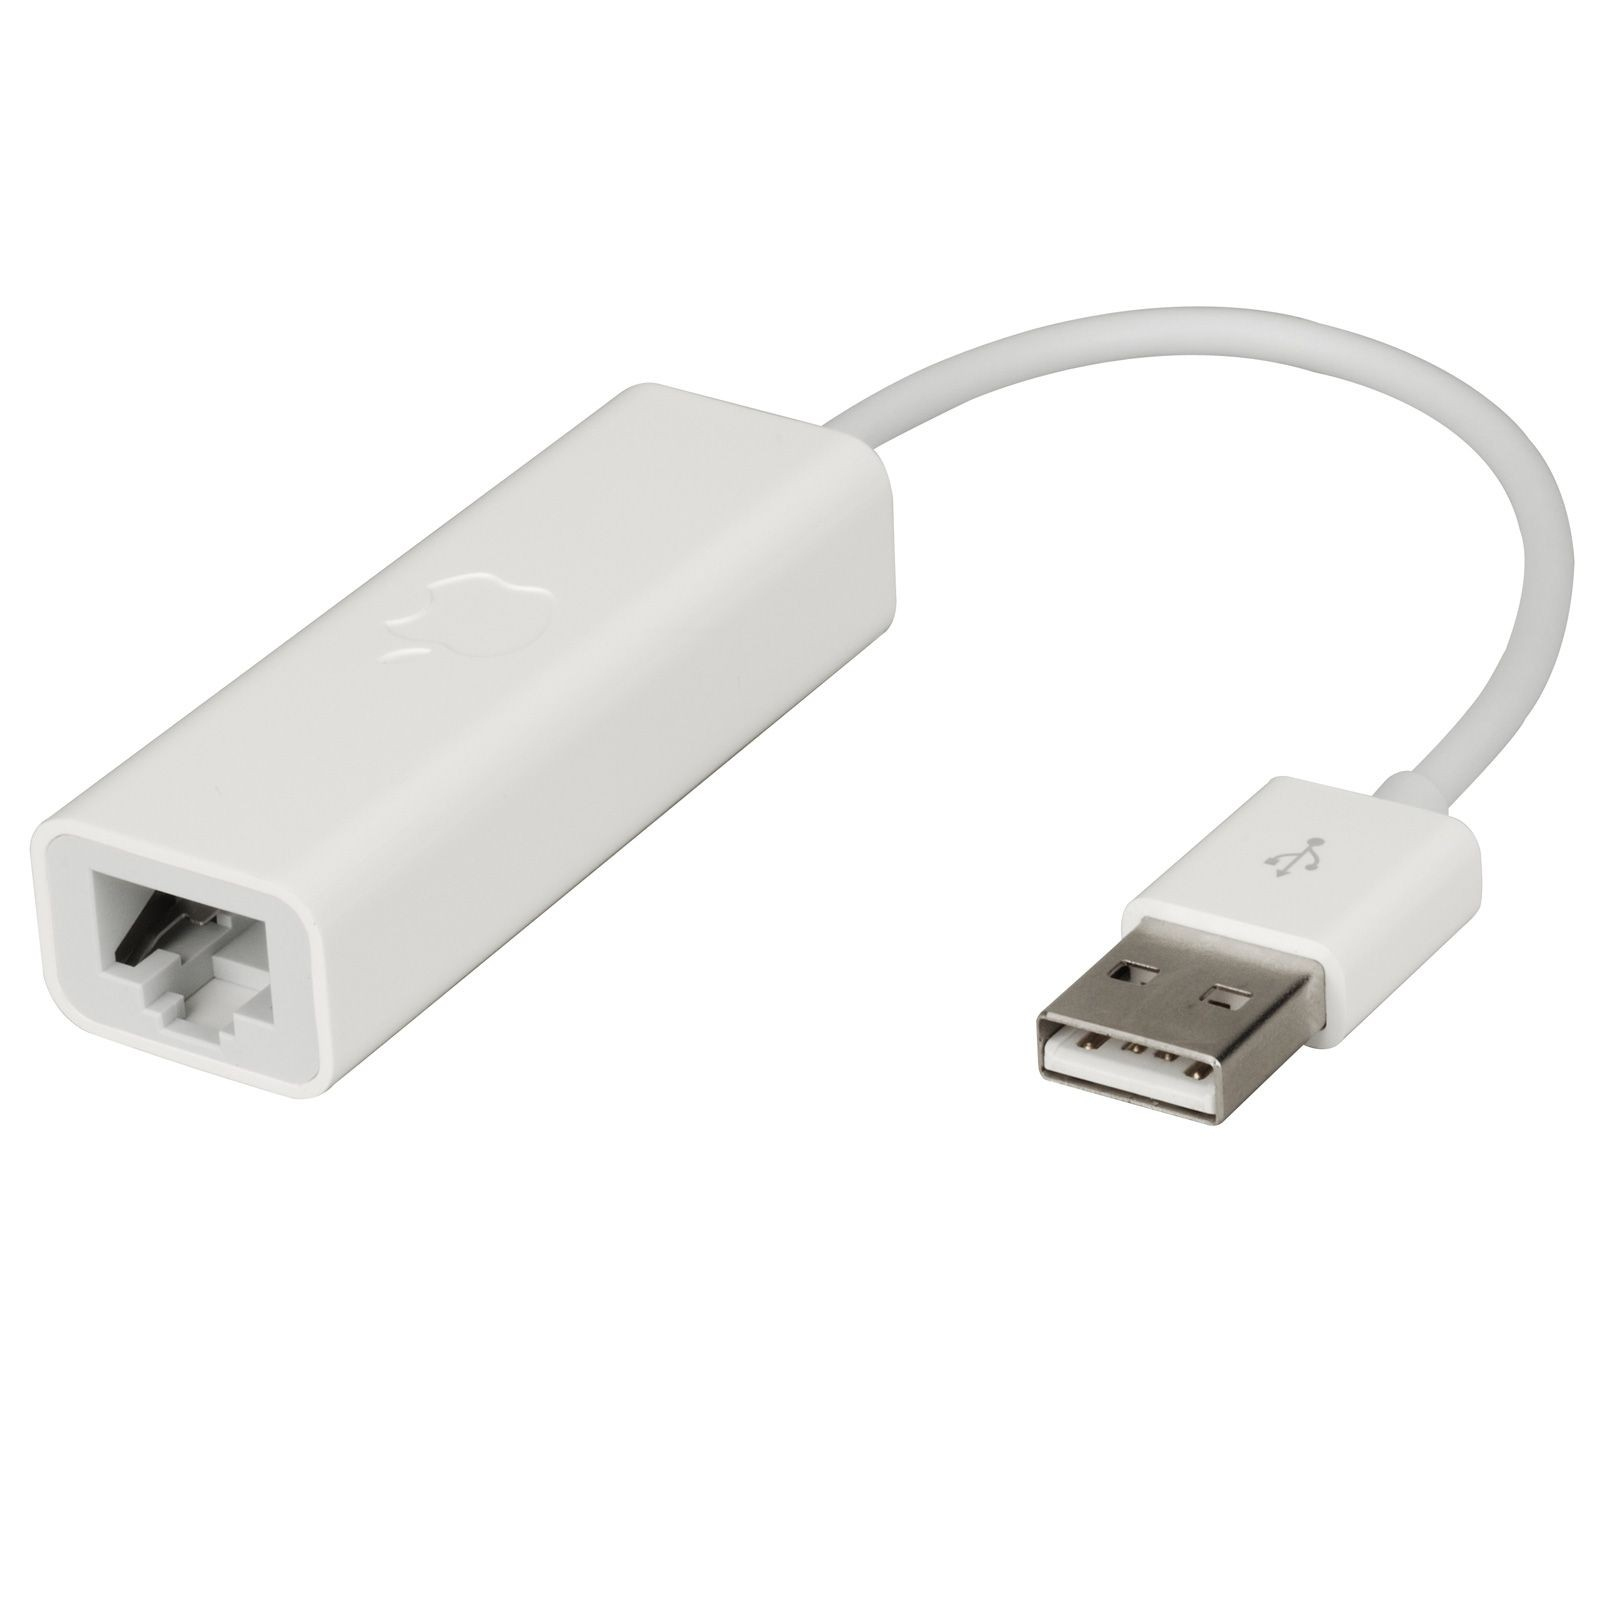 mac airbook ethernet adapter